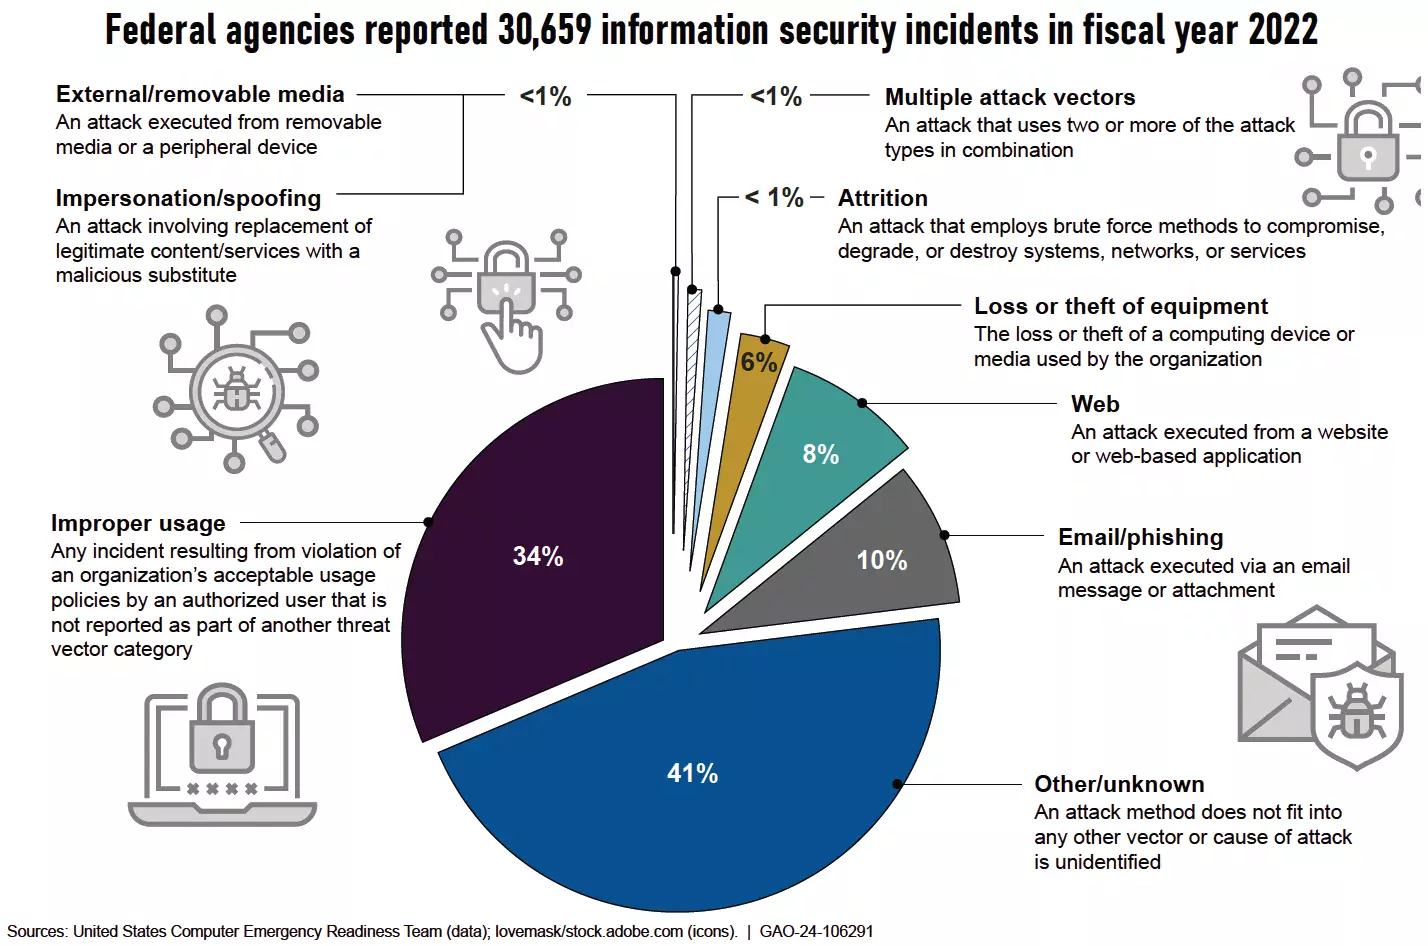 Federal agencies reported 30,659 information security incidents in fiscal year 2022